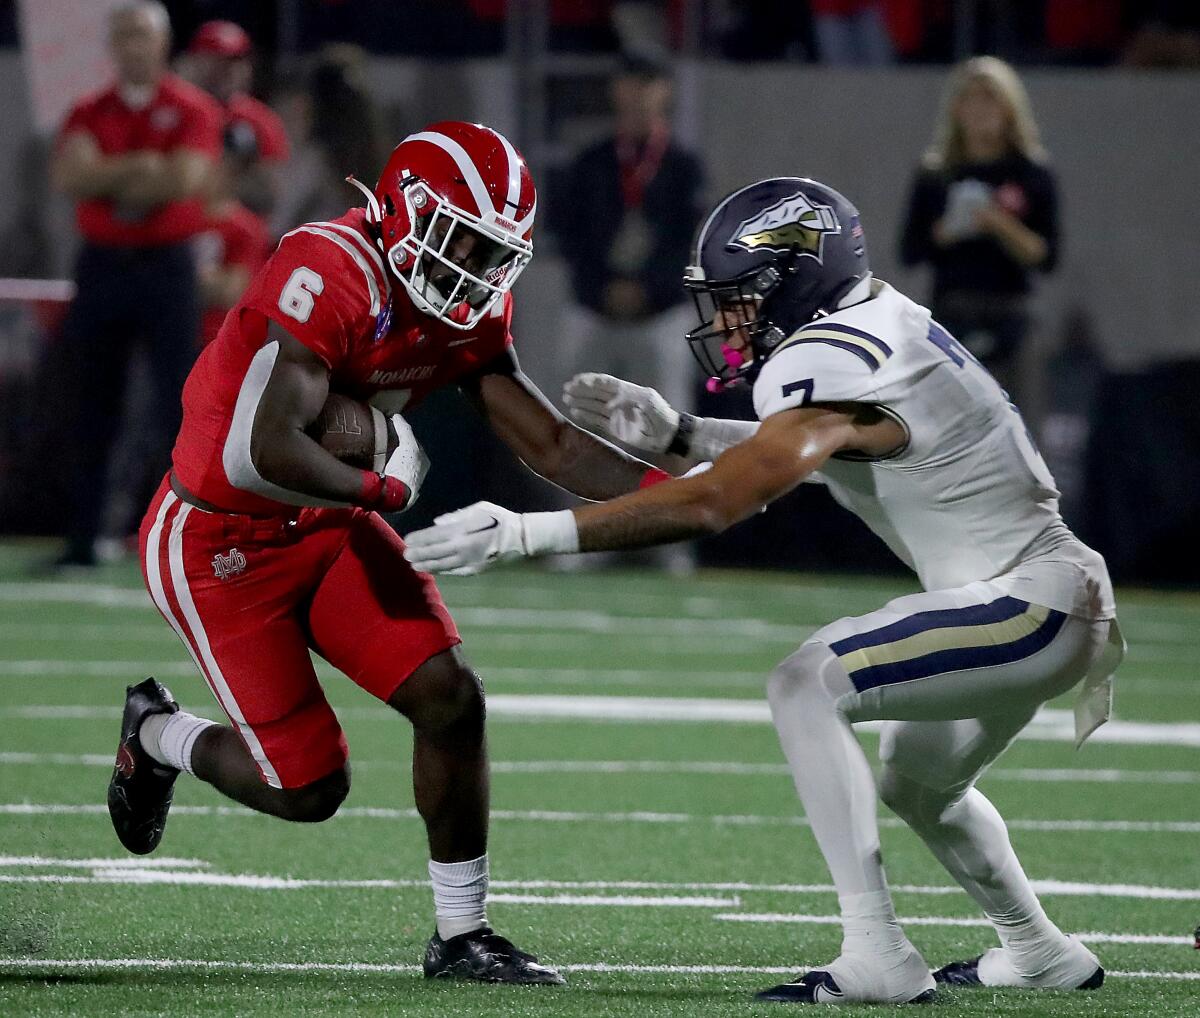 Mater Dei running back Nathaniel Frazier tries to elude St. John Bosco defensive back Peyton Woodyard in a game last season.